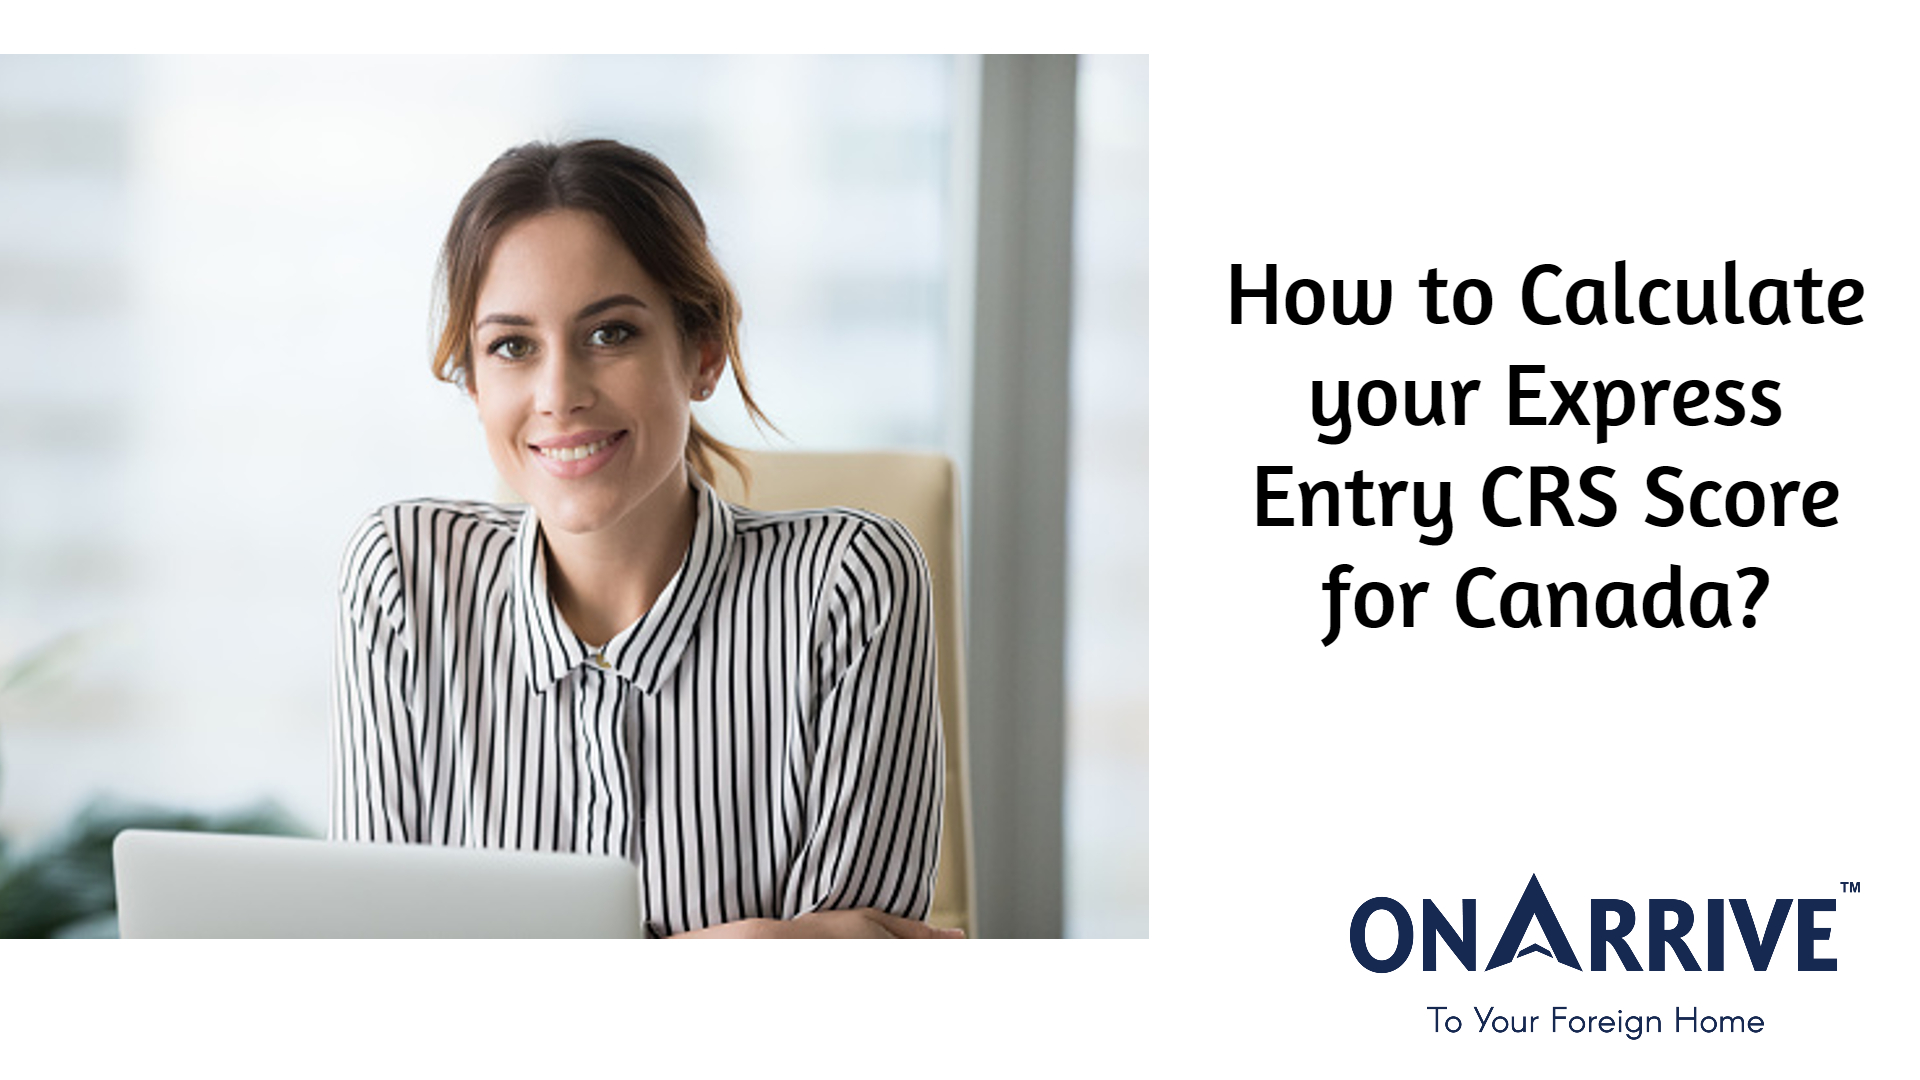 How to Calculate your Canada Express Entry CRS Score in 2022?